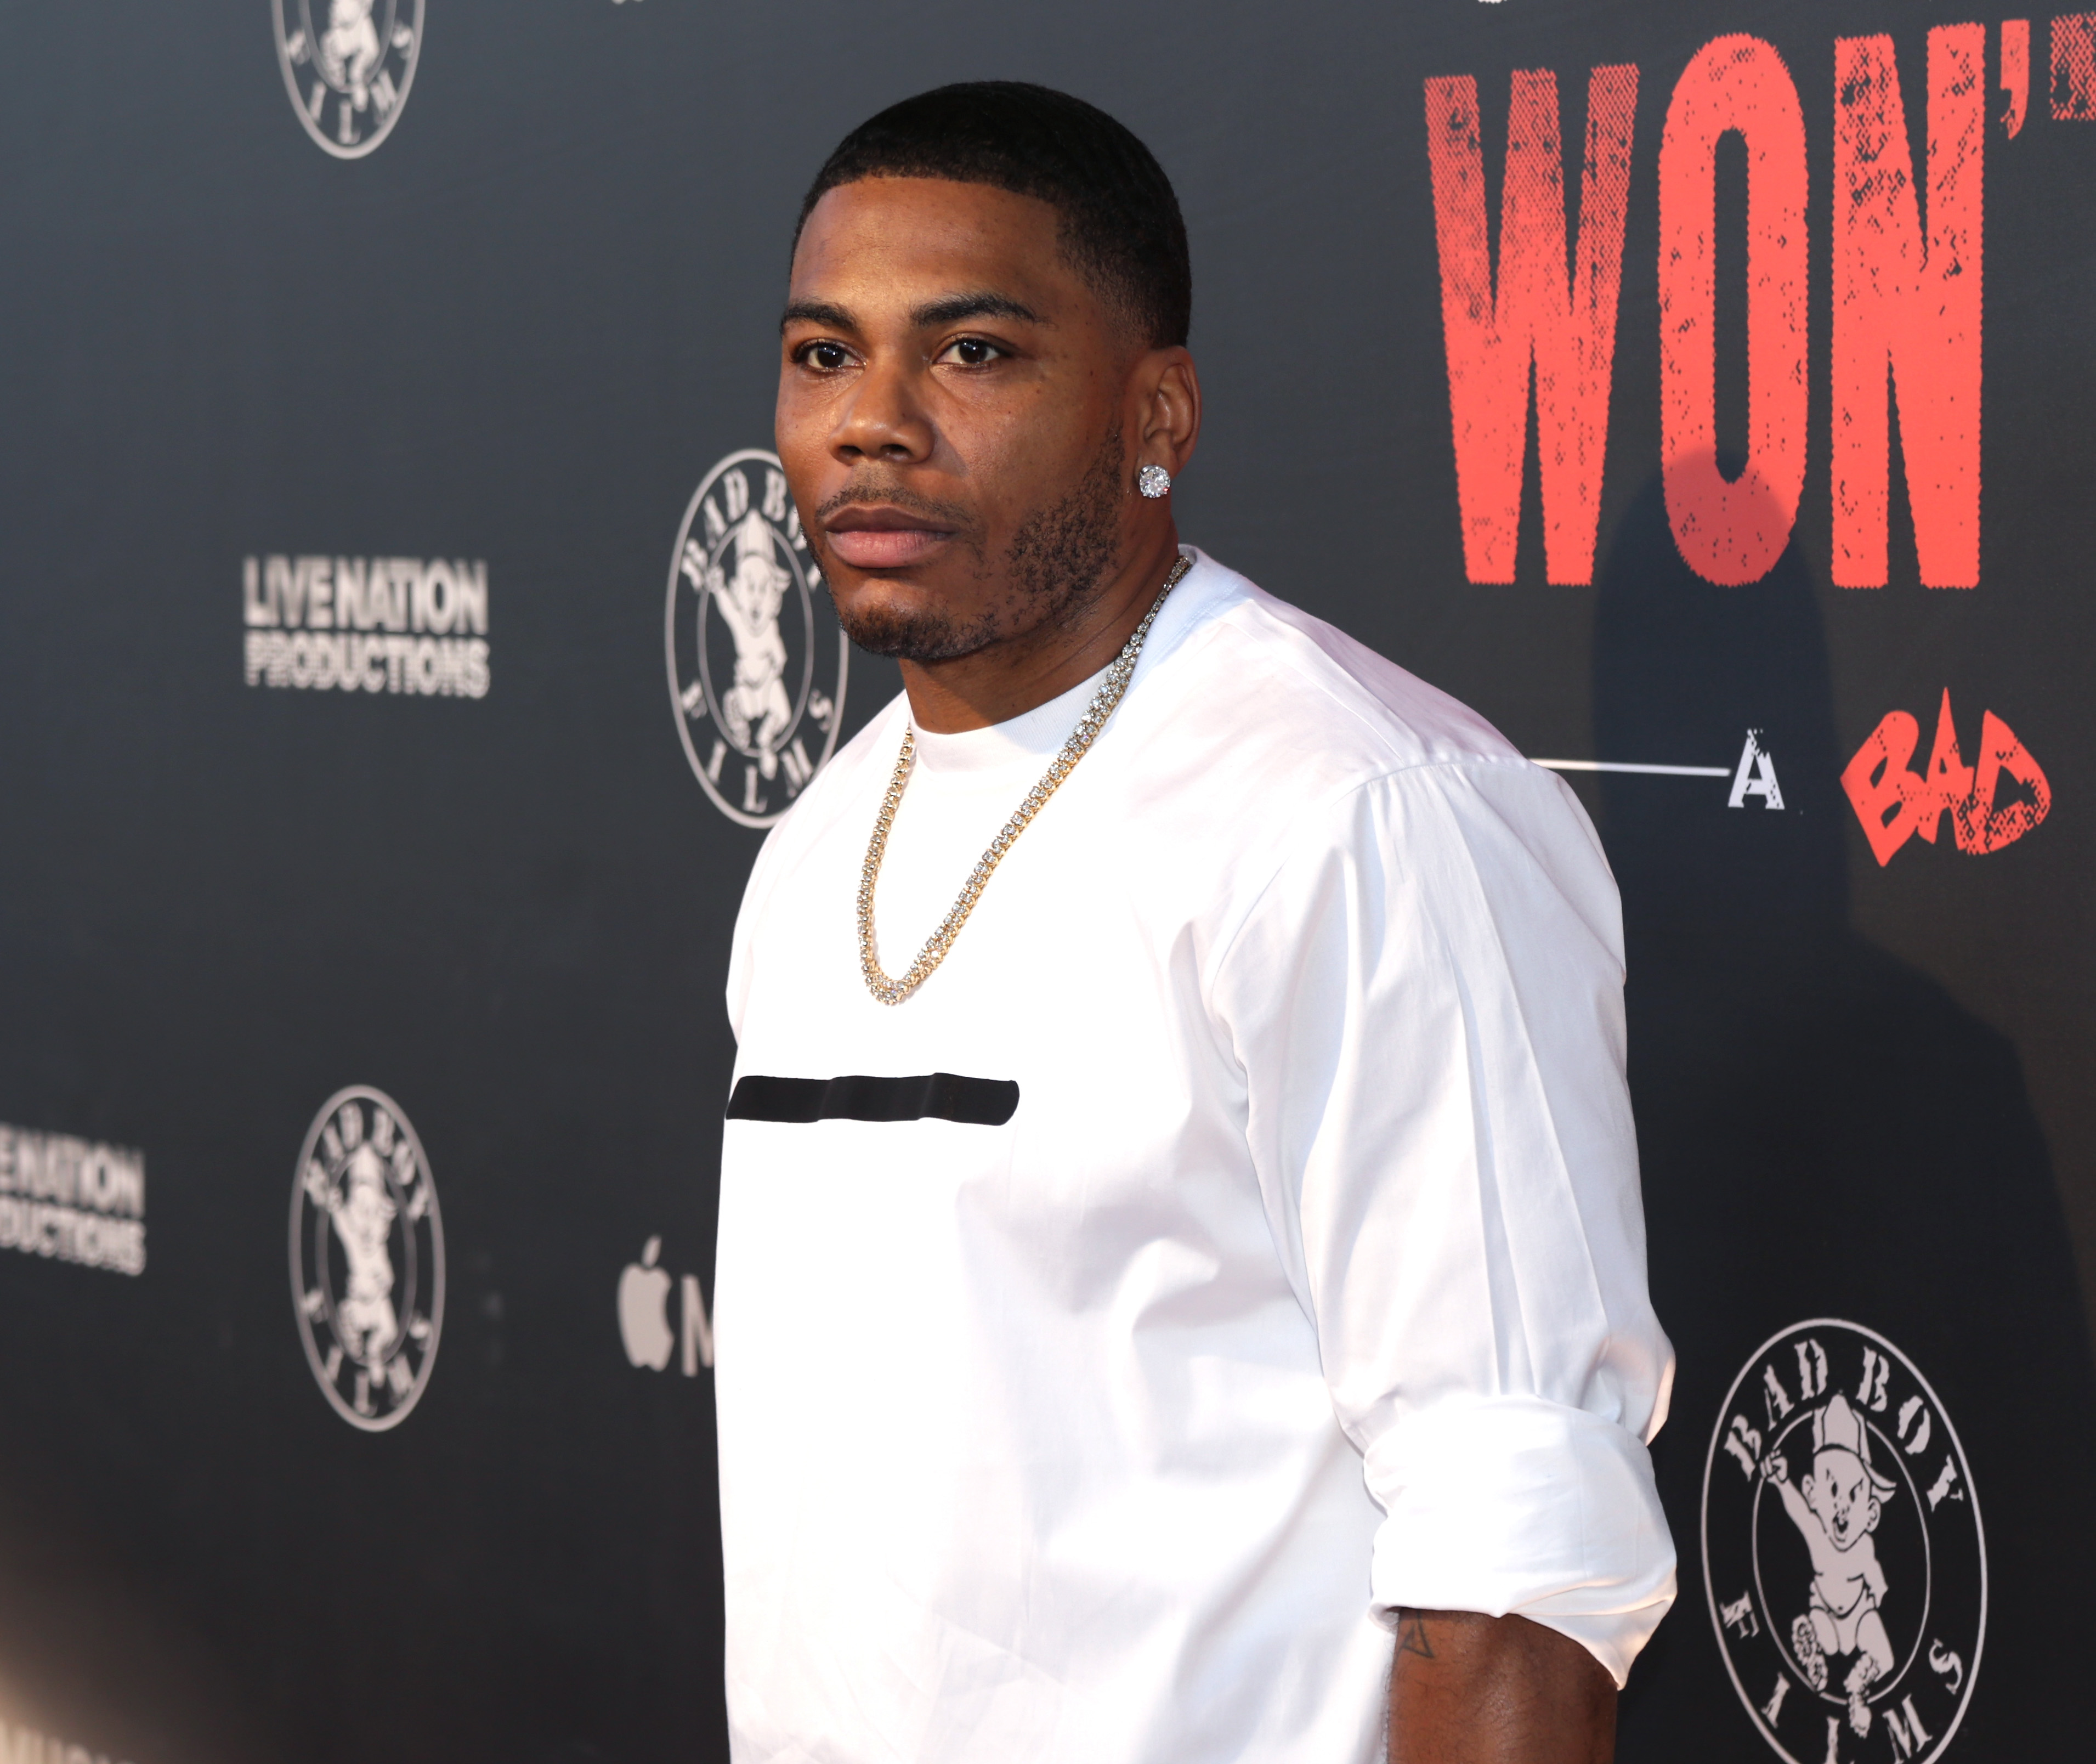 Nelly attends the Los Angeles Premiere Of "Can't Stop Won't Stop" at Writers Guild of America, West on June 21, 2017, in Los Angeles, California. | Source: Getty Images